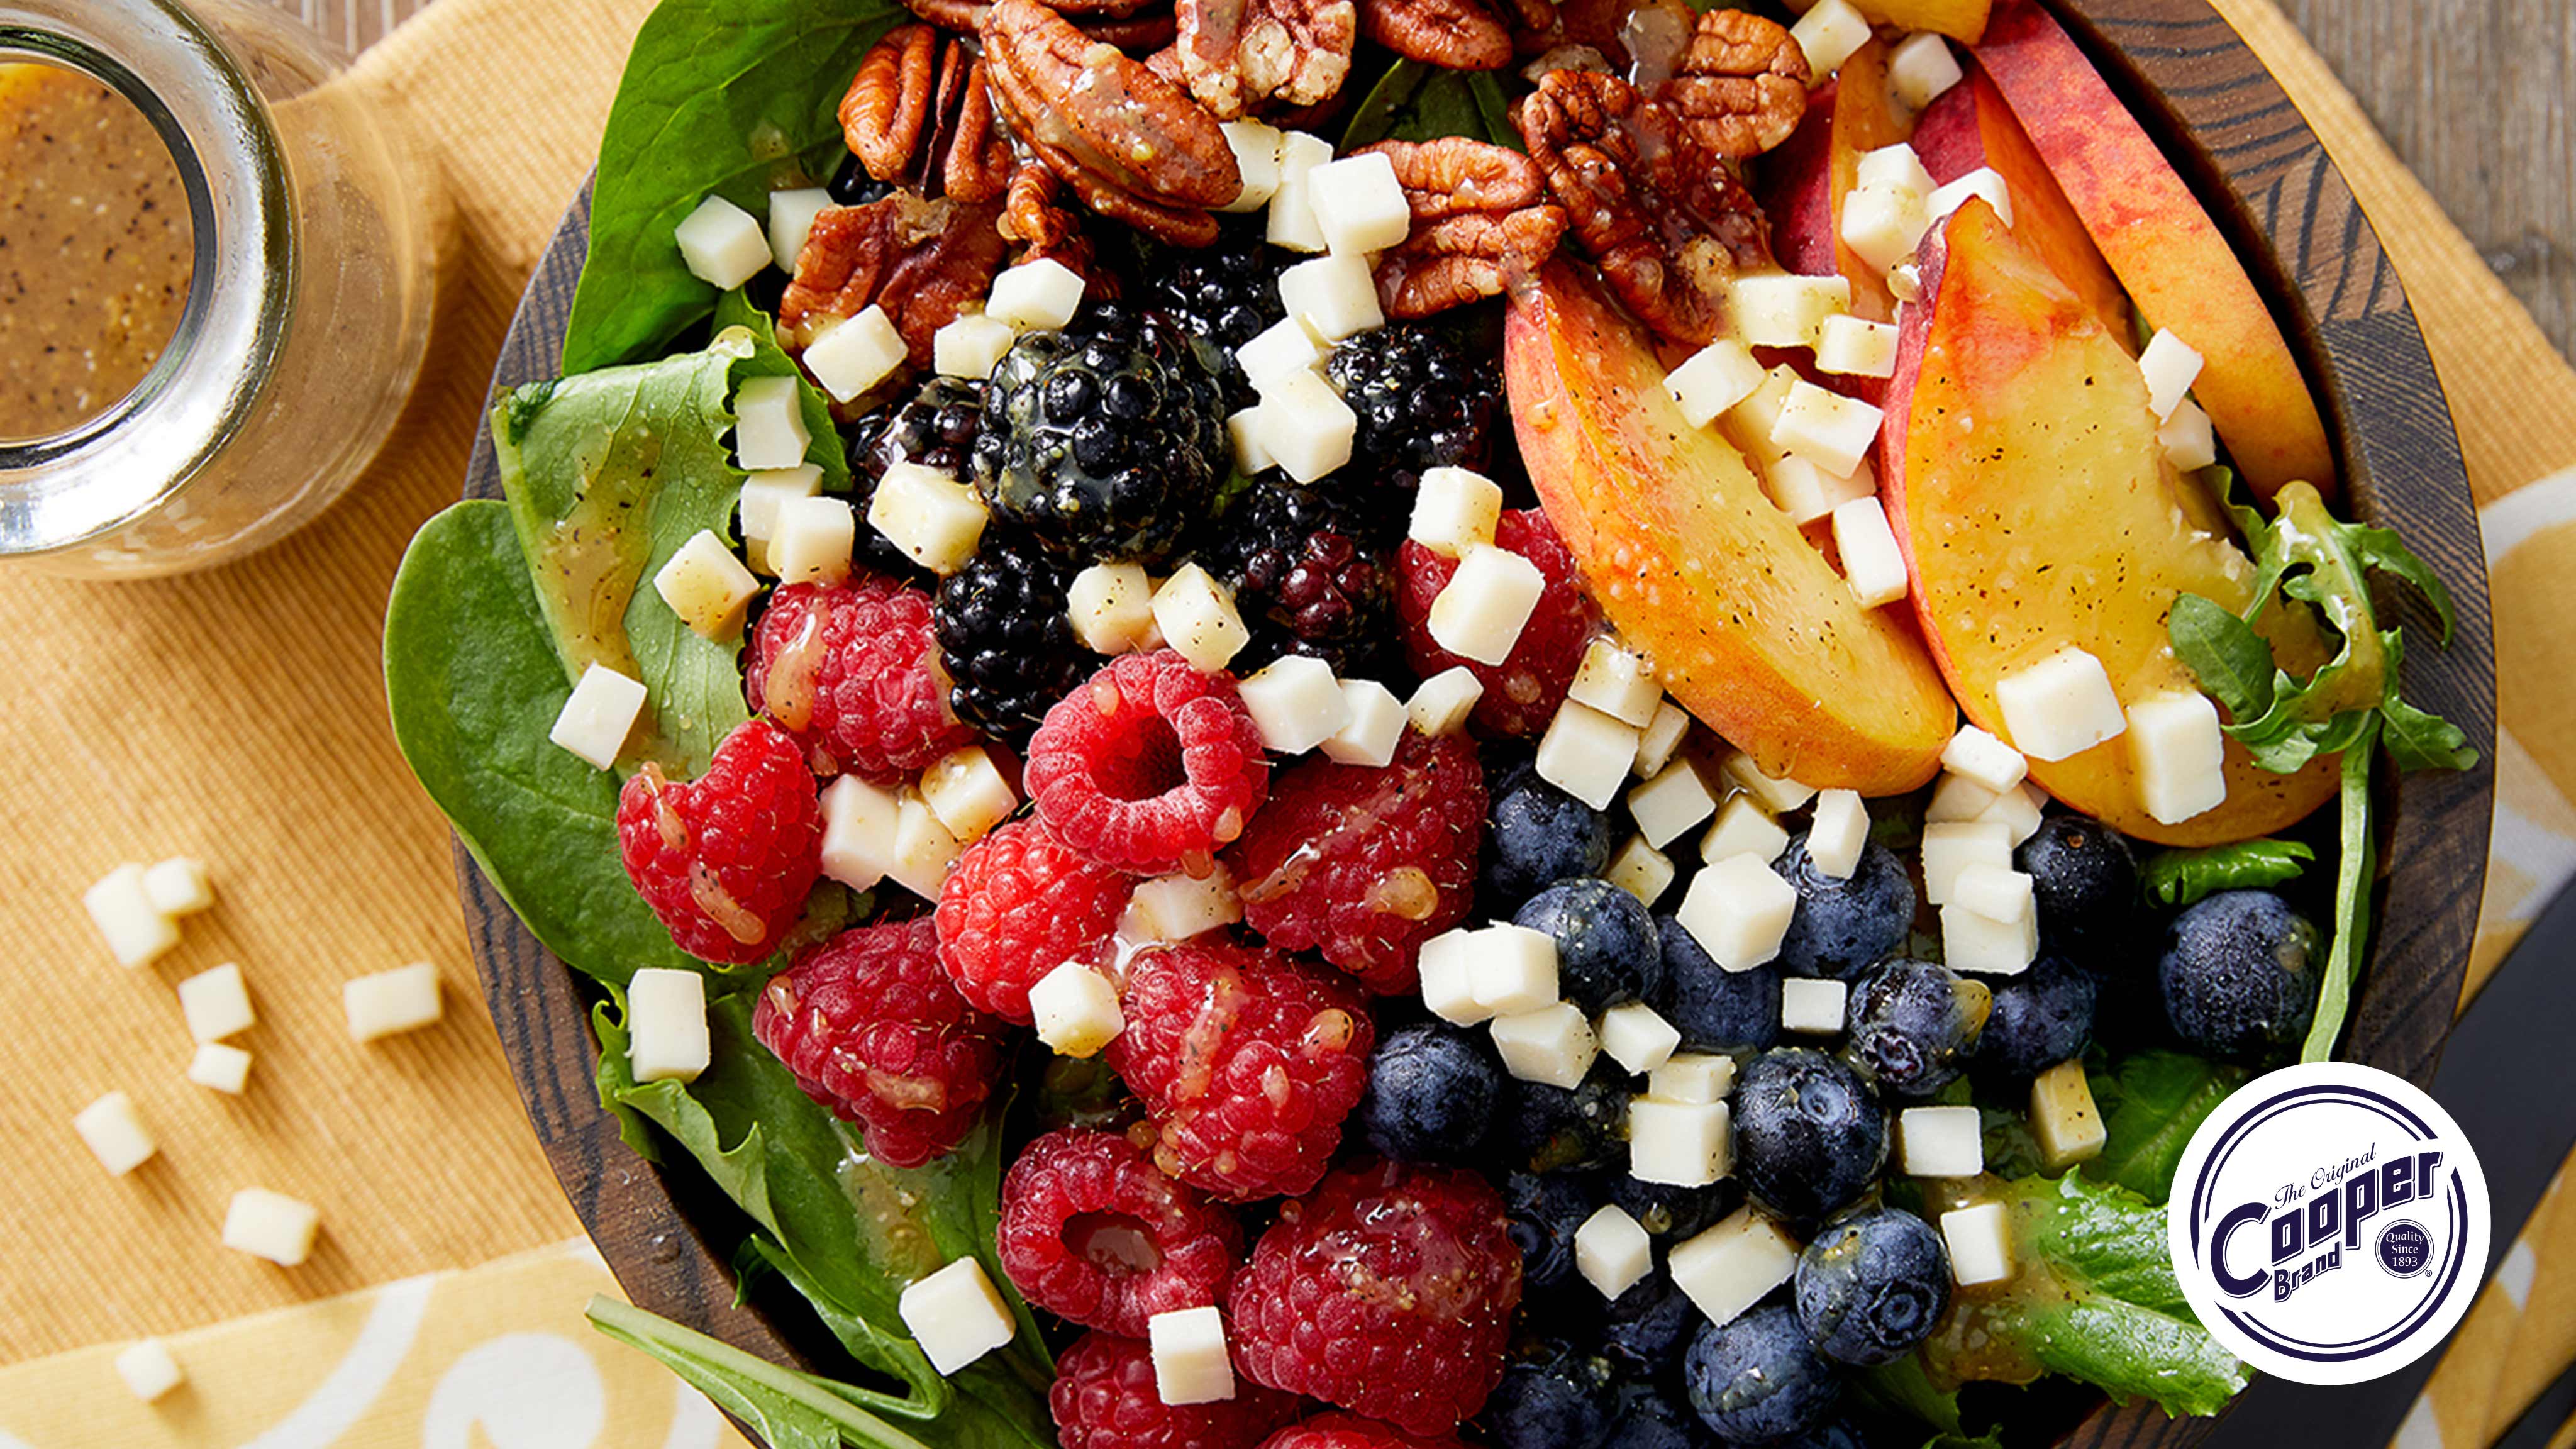 Image for Recipe Cooper® Cheese Fruit and Nut Salad with Honey Mustard Dressing